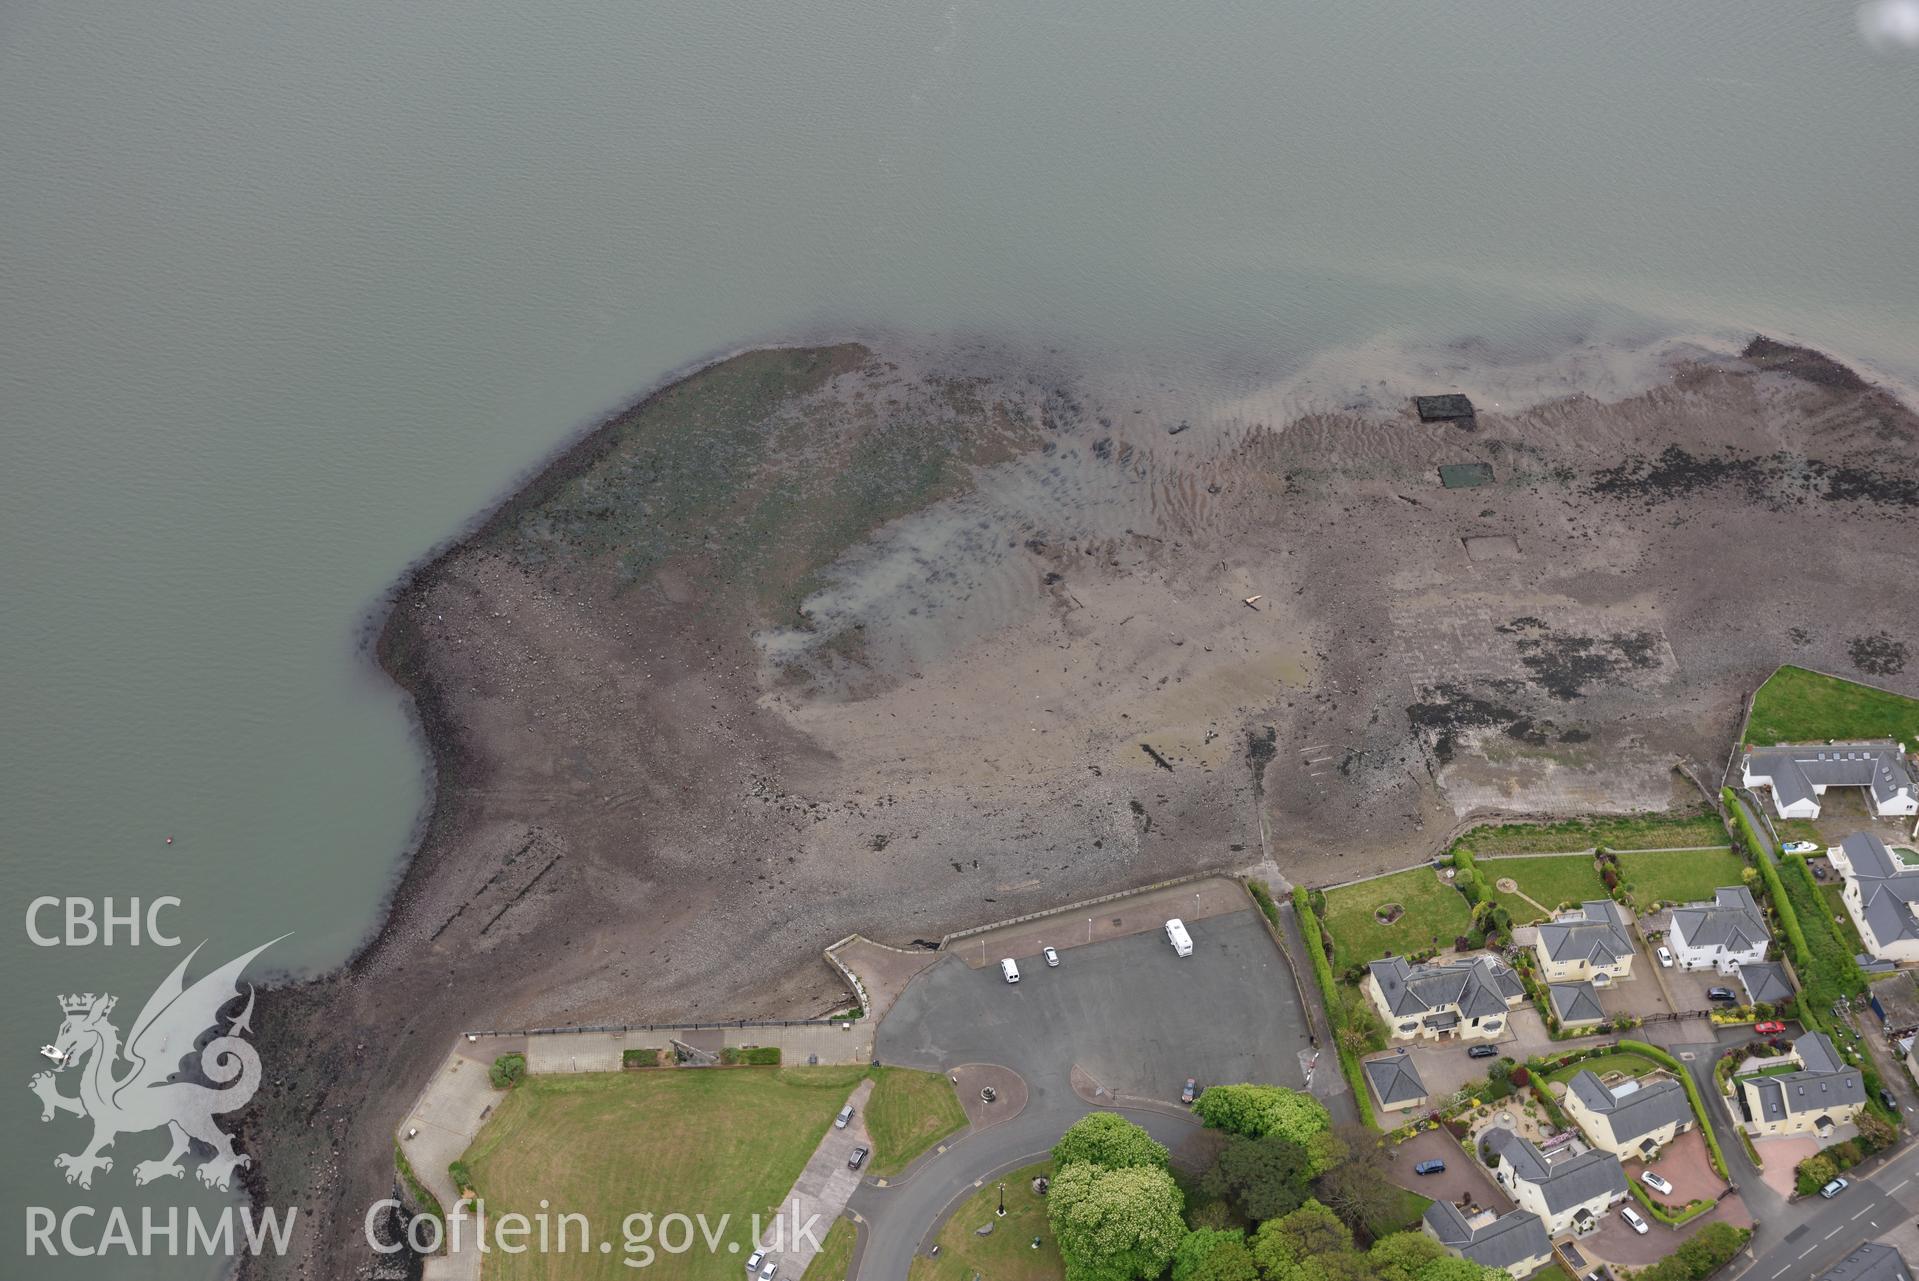 Neyland embarkation hards, at low tide. Baseline aerial reconnaissance survey for the CHERISH Project. ? Crown: CHERISH PROJECT 2017. Produced with EU funds through the Ireland Wales Co-operation Programme 2014-2020. All material made freely available through the Open Government Licence.